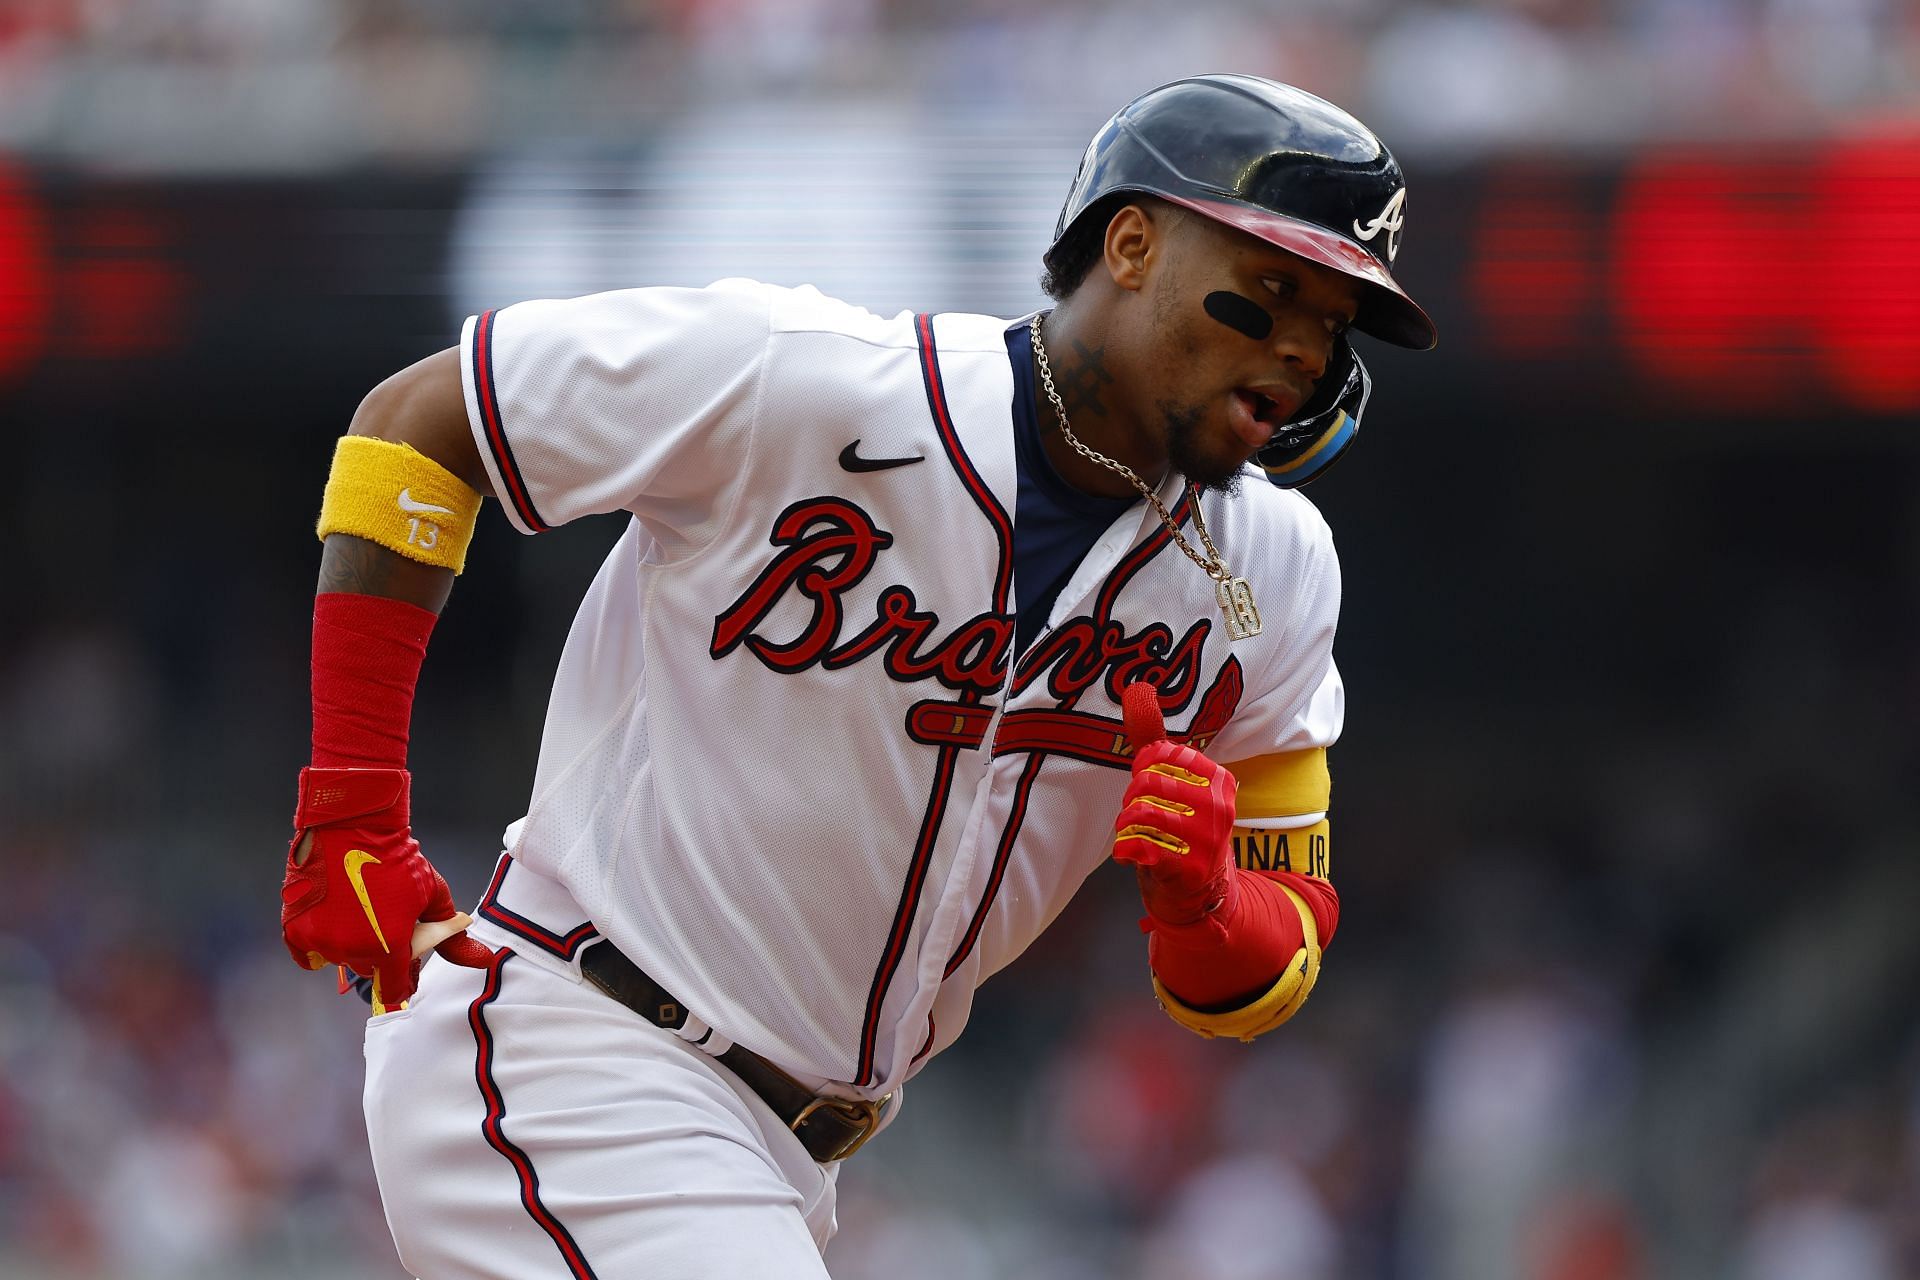 Ronald Acuna Jr. rounds the bases for the Atlanta Braves.